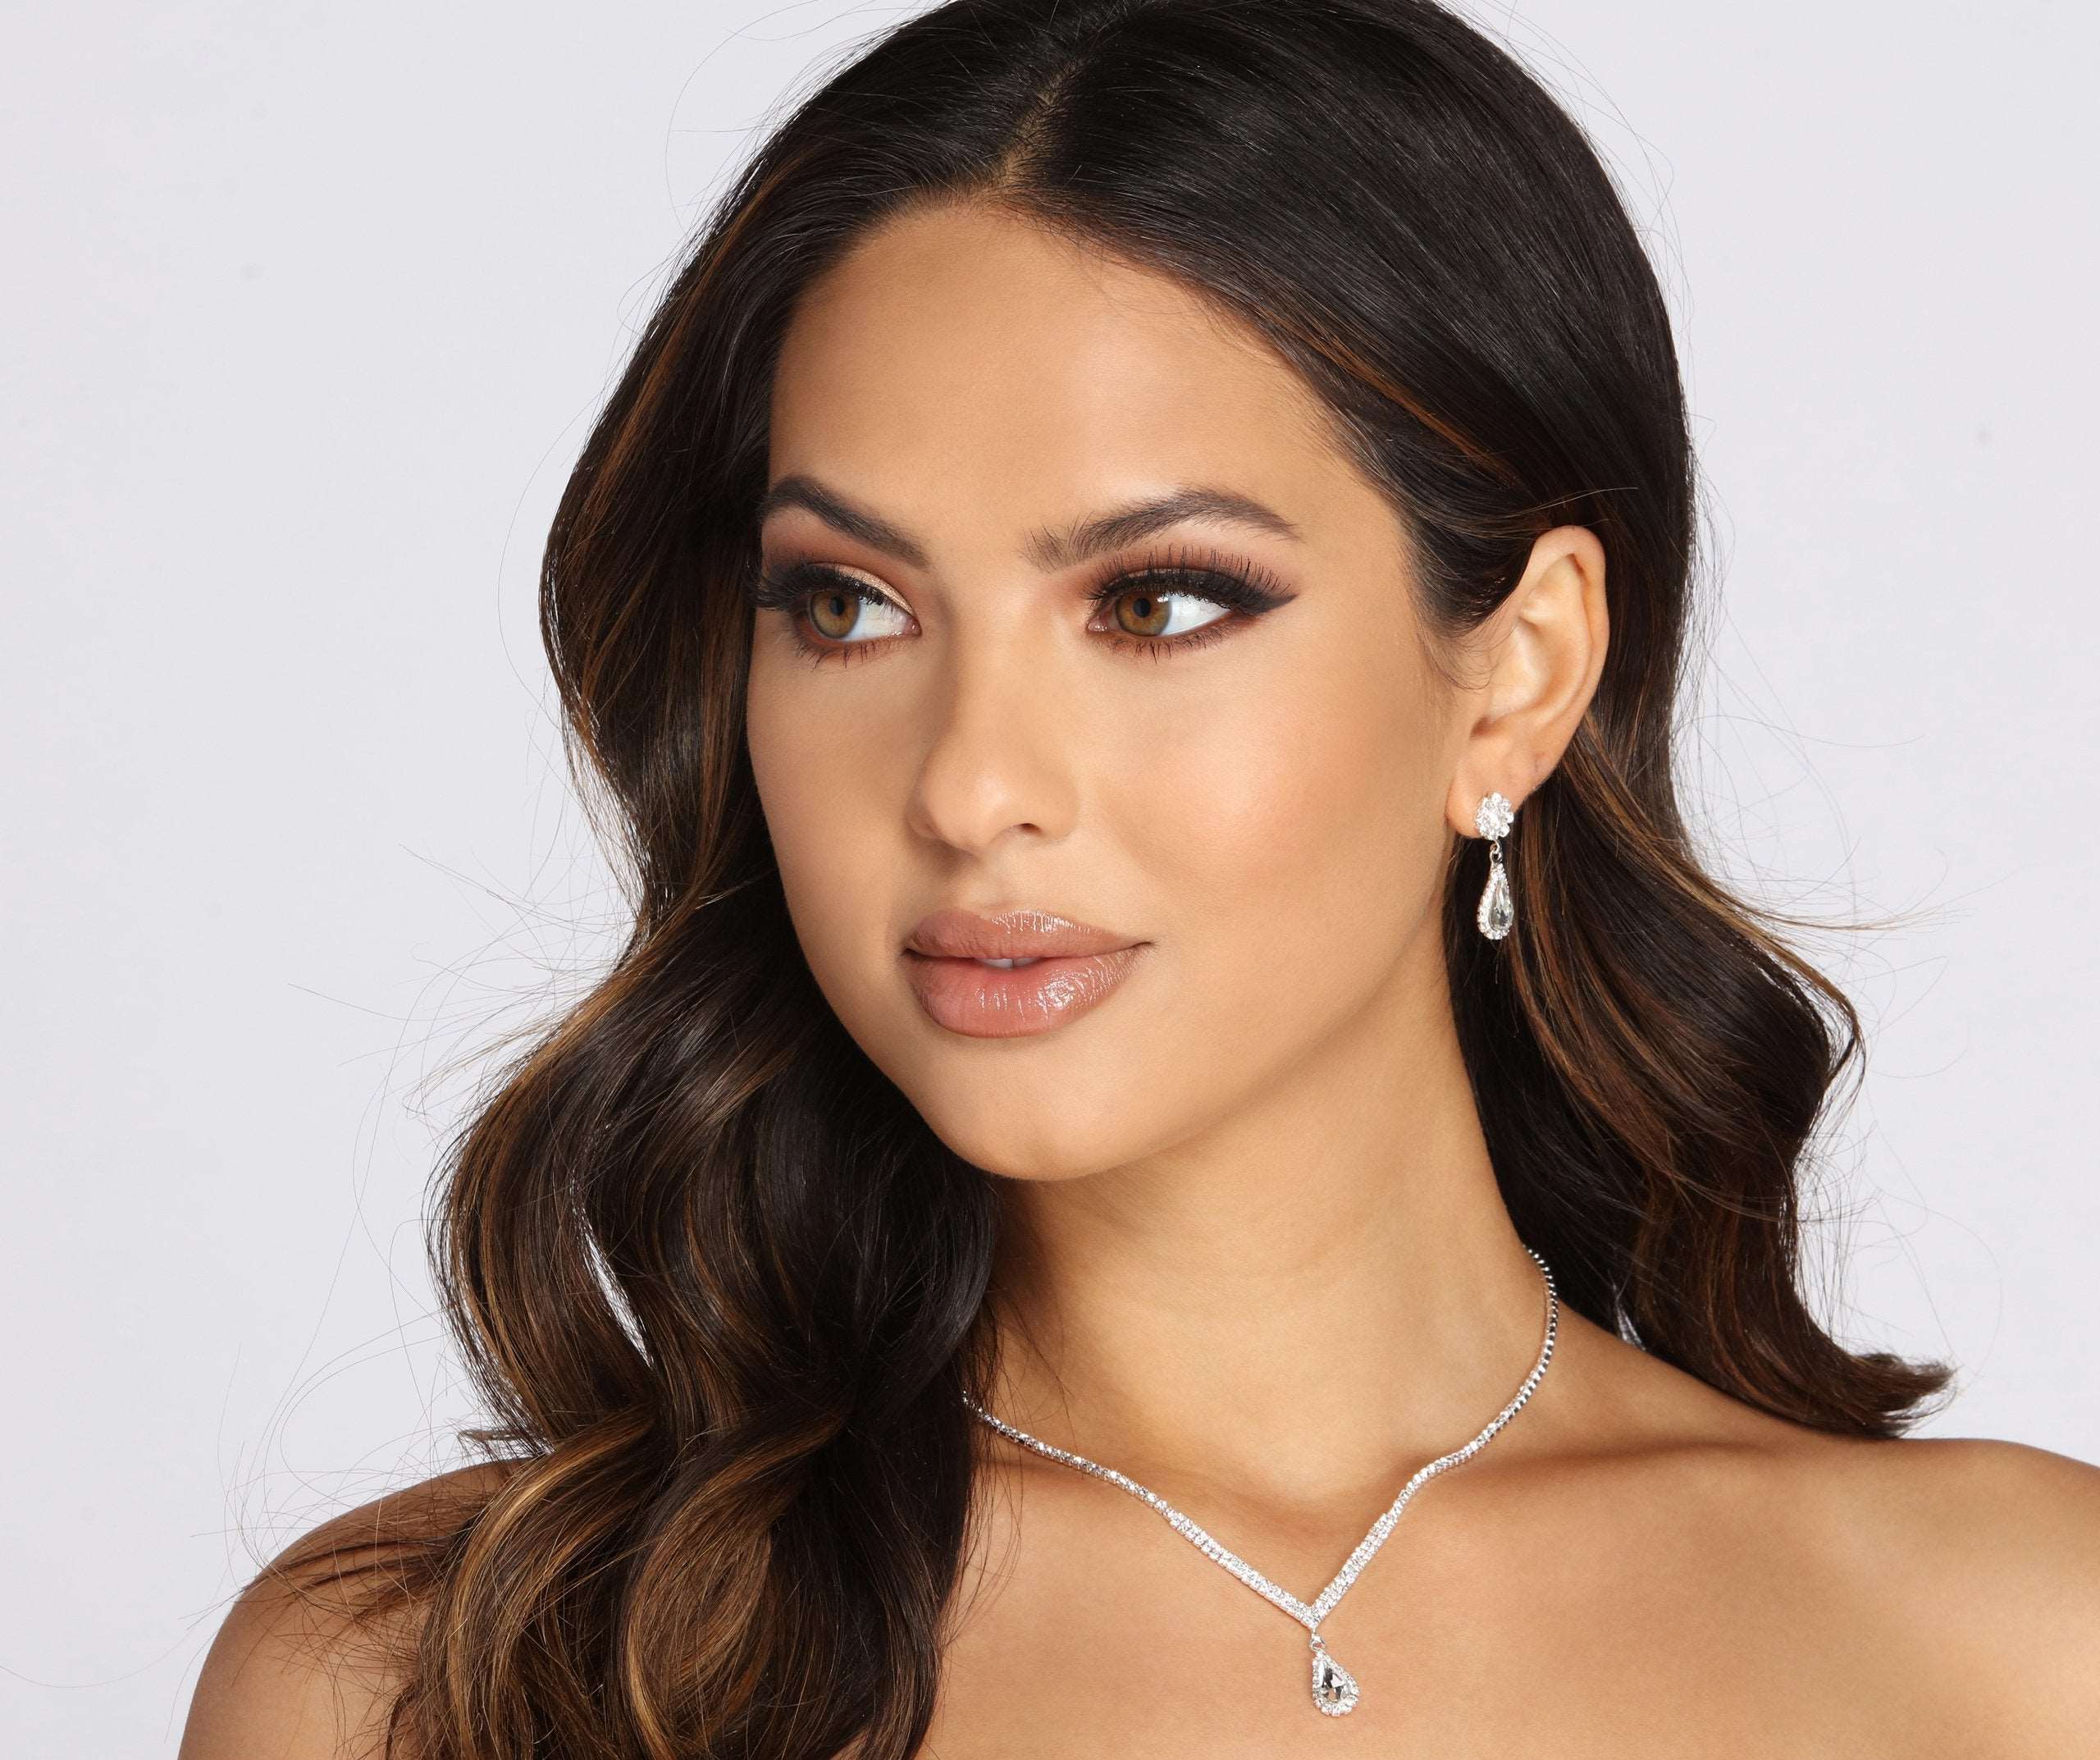 A Drop Of Glam Necklace Set